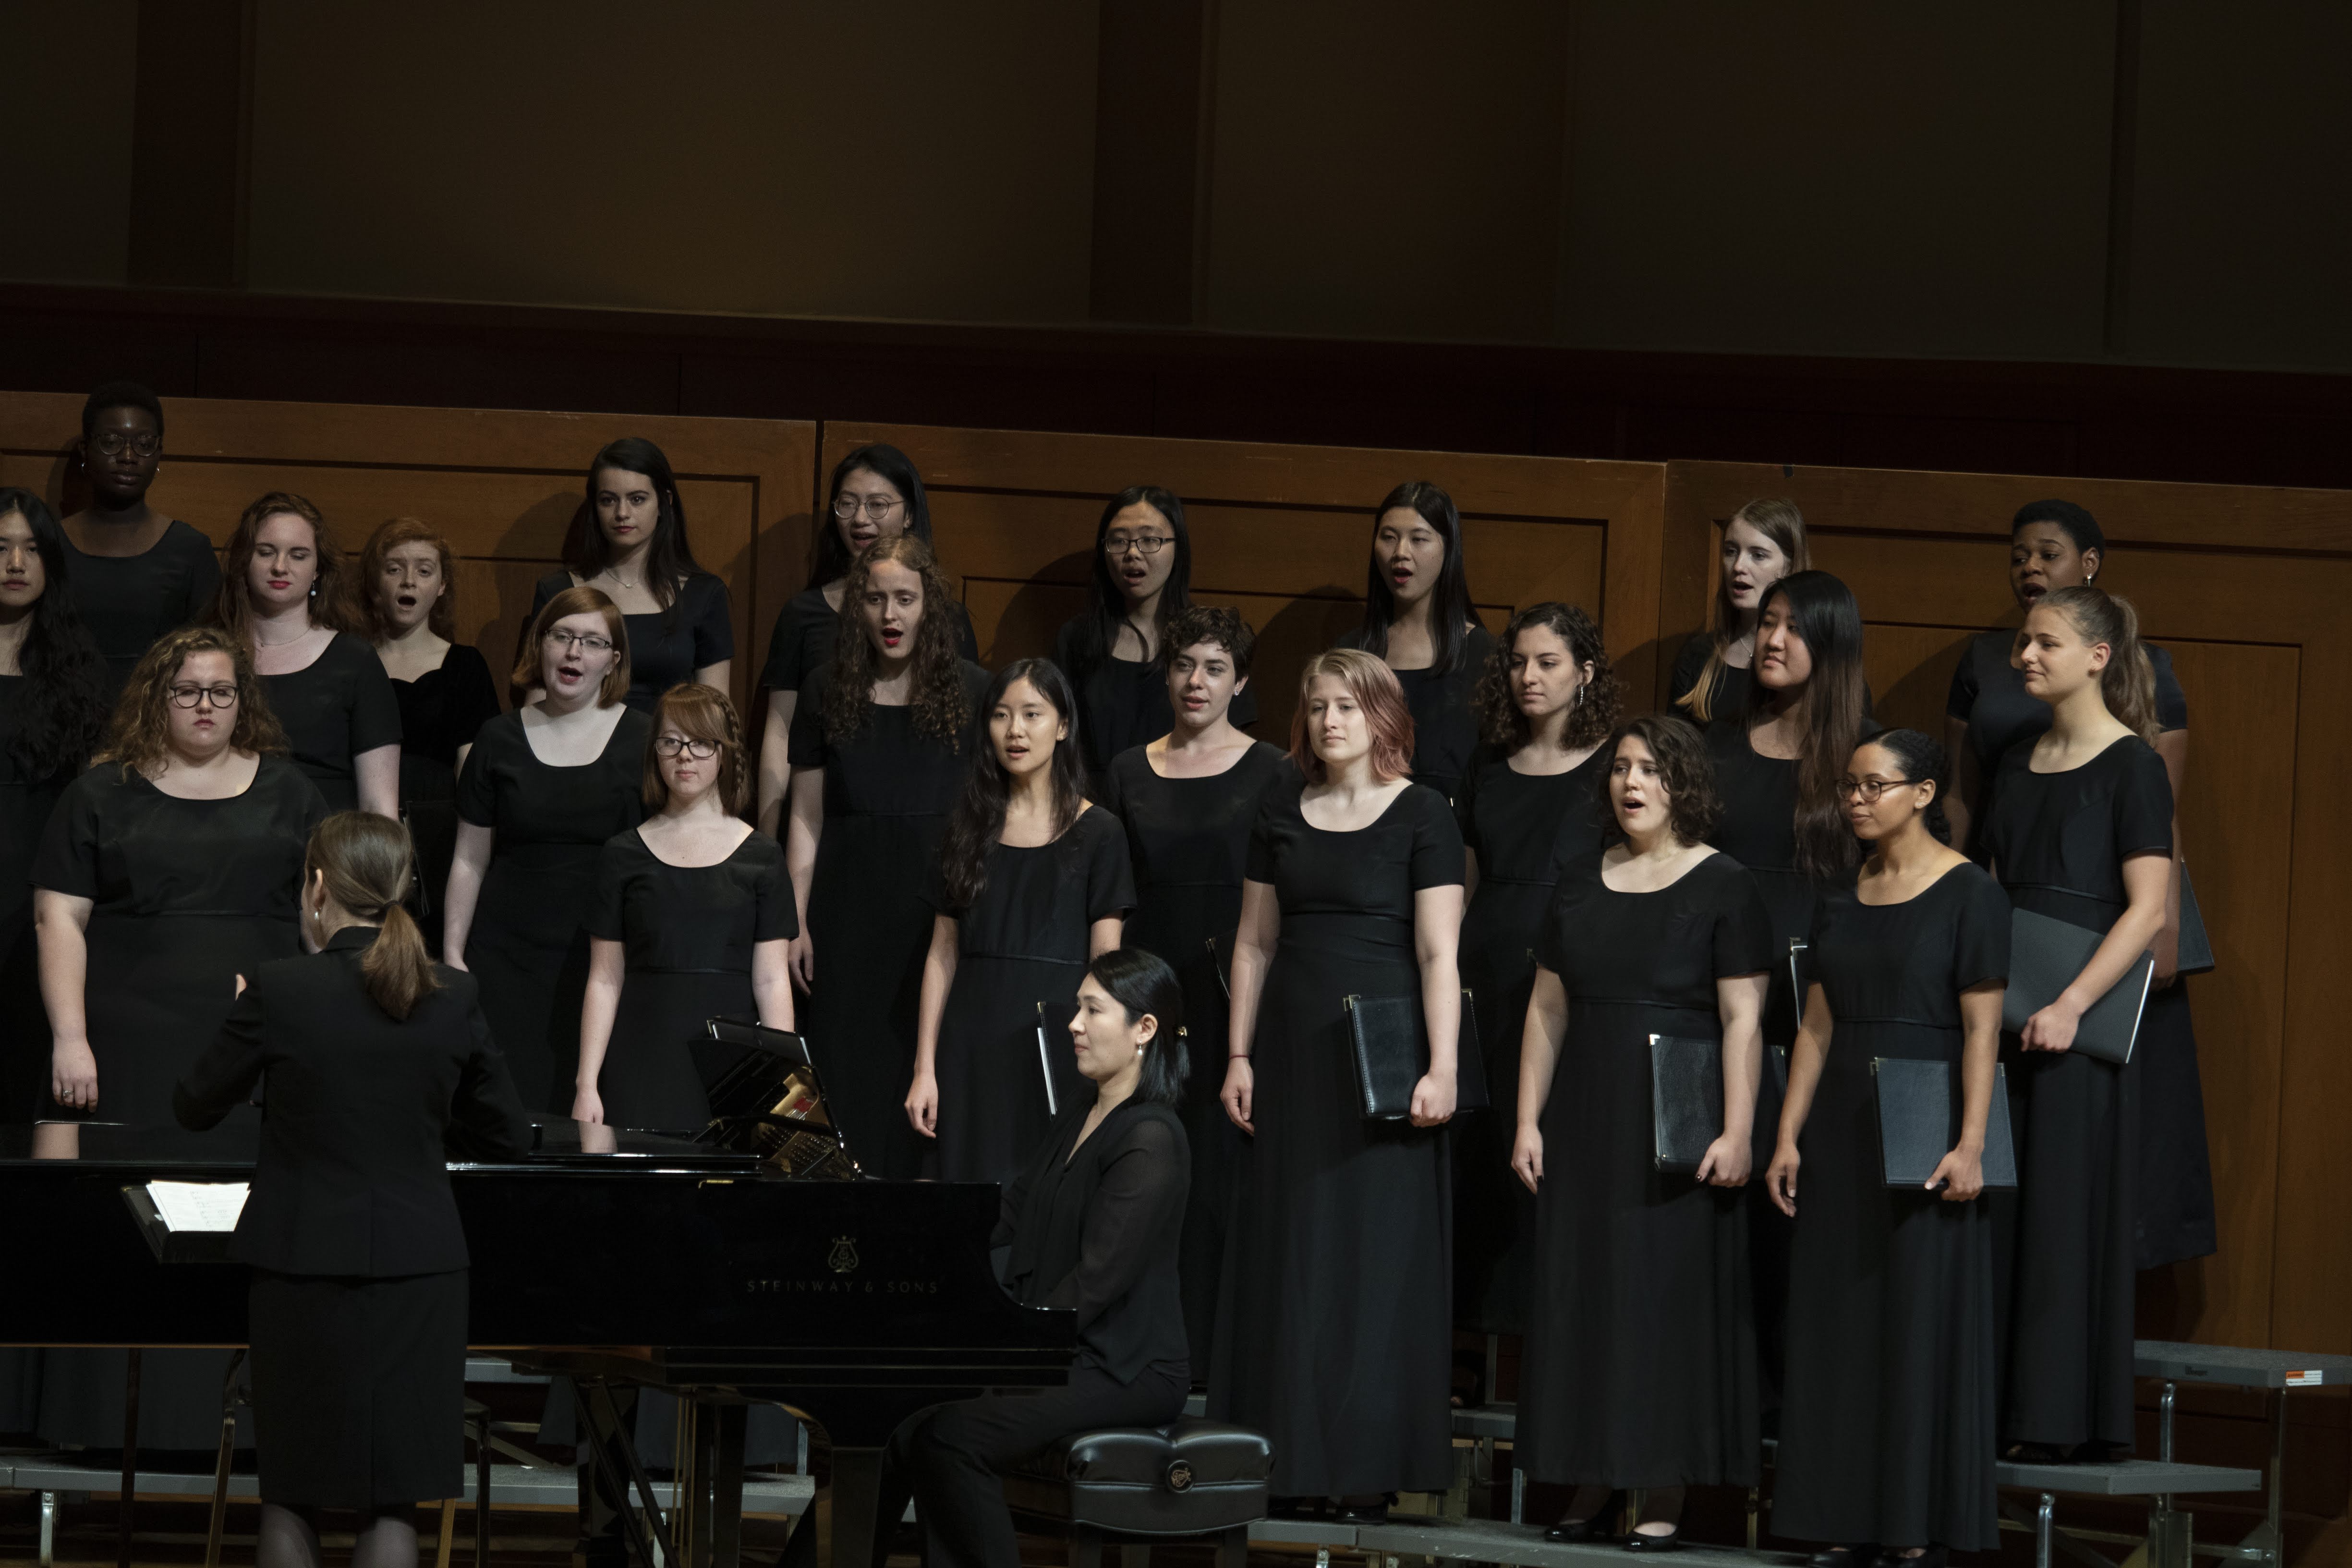 Laura Alexander conducts the UNC Glee Club, Soprano/Alto voices on Moeser Auditorium stage.